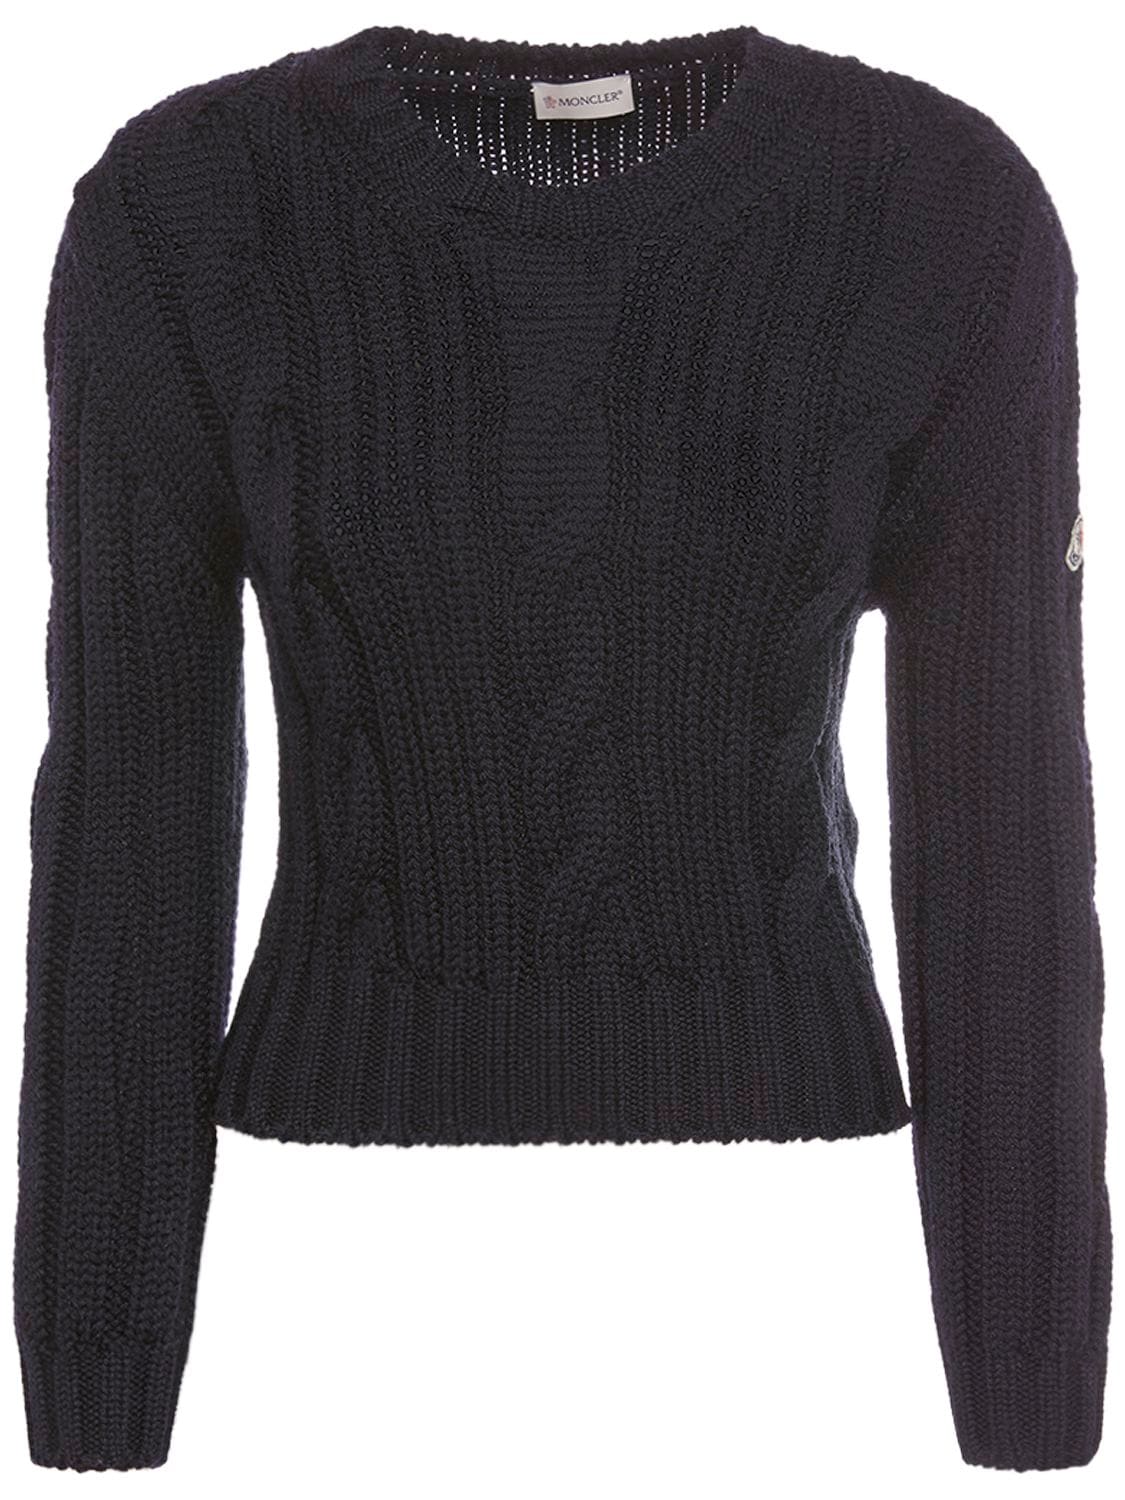 Image of Tricot Wool Crewneck Sweater